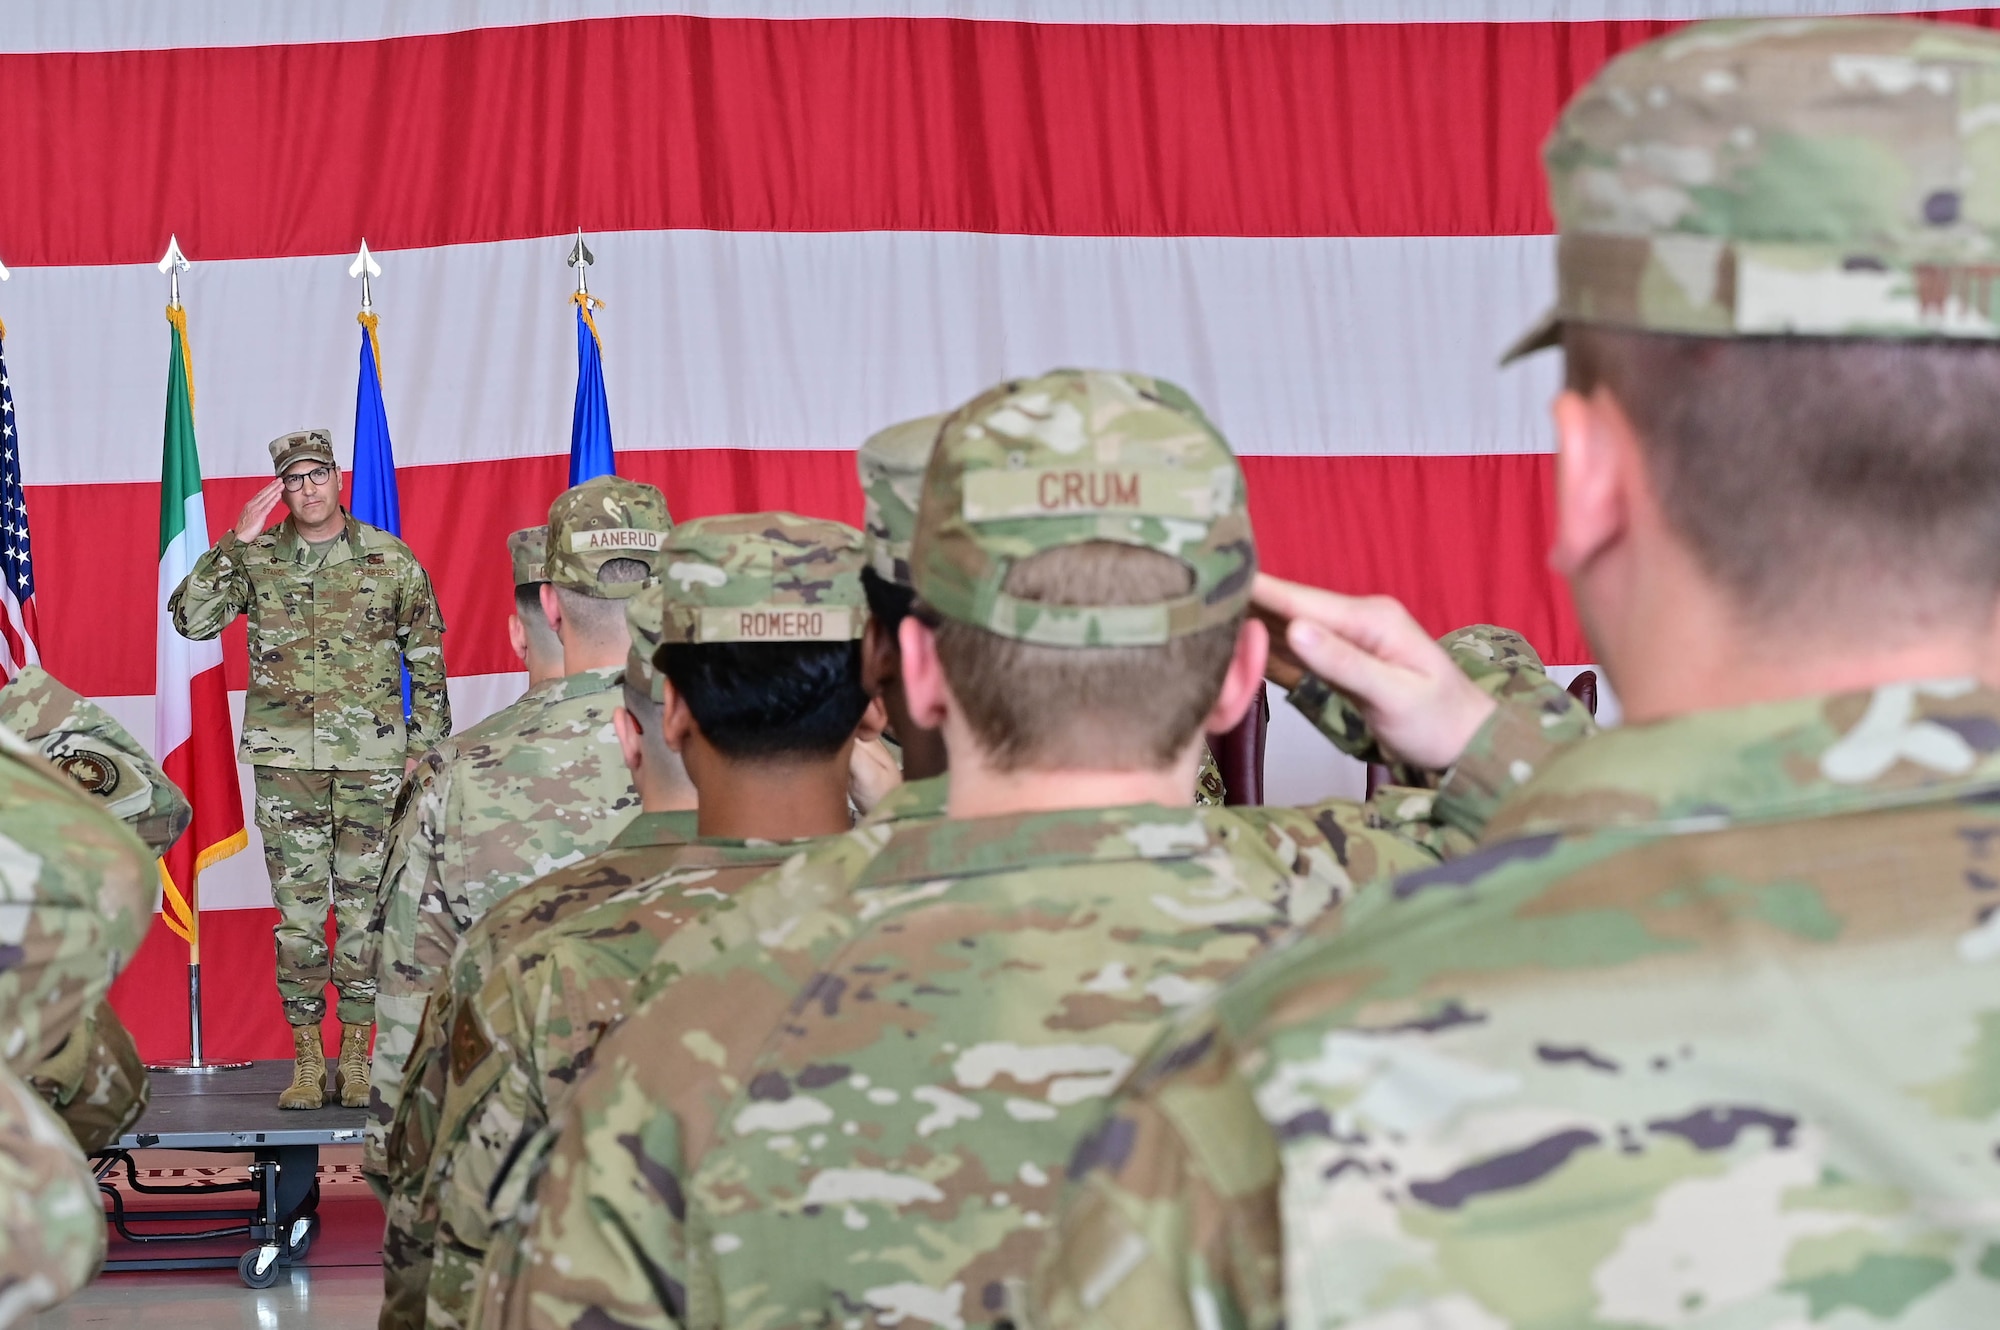 U.S. Air Force Col. Joe Stangl, 31st Maintenance Group incoming commander, renders his first salute to the group as their commander at Aviano Air Base, Italy, June 15, 2023. The 31st Maintenance Group responds to humanitarian and contingency logistics support requirements in Europe, Africa and Southwest Asia. (U.S. Air Force photo by Airman Zachary Jakel)